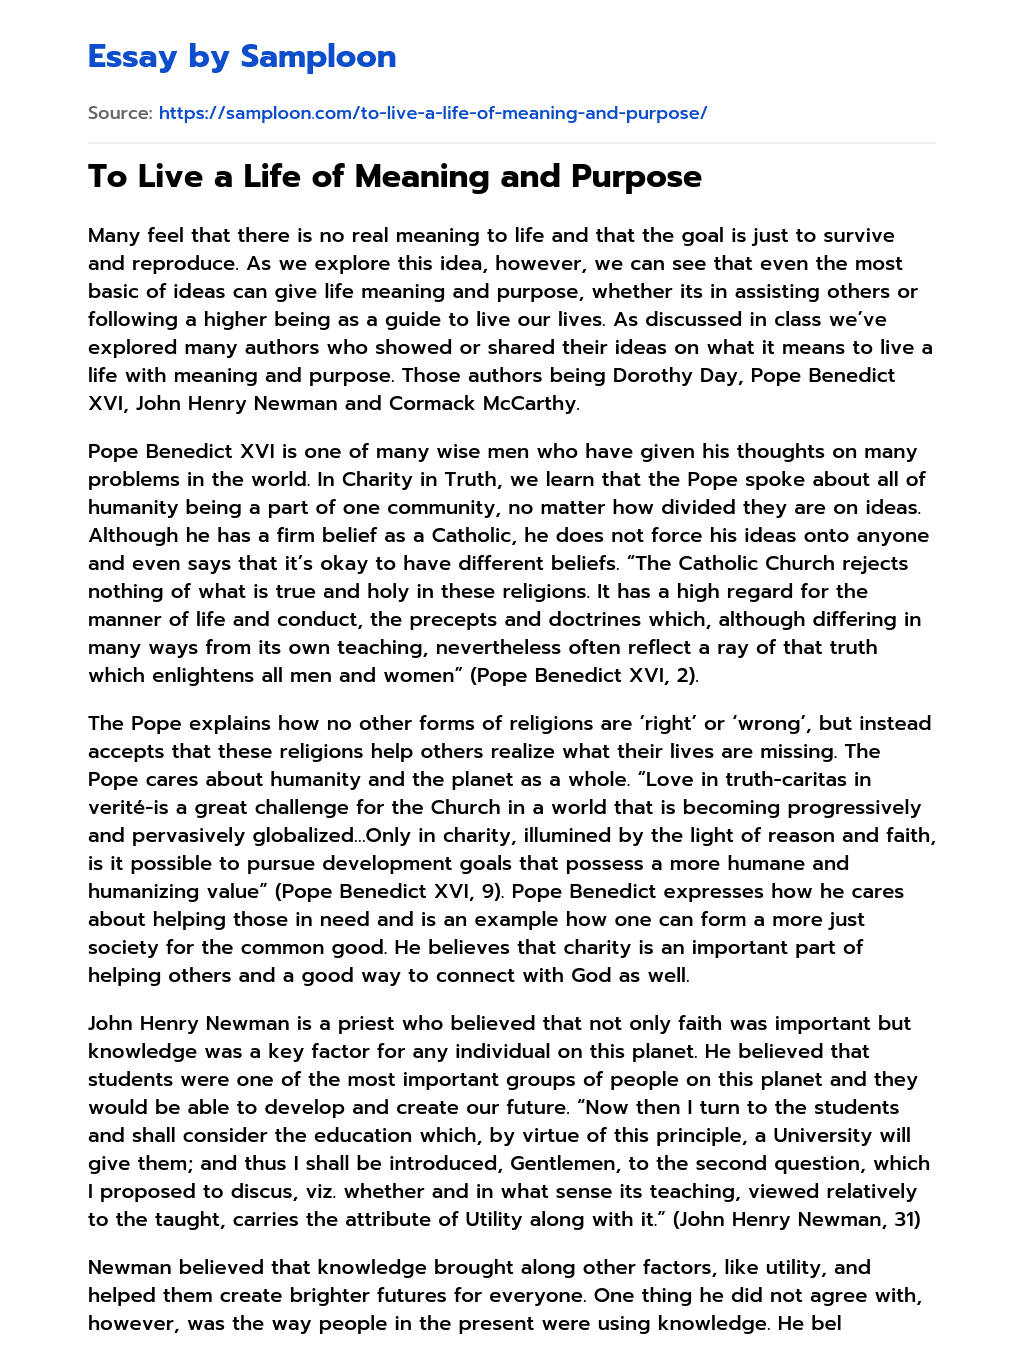 purpose and meaning of life essay